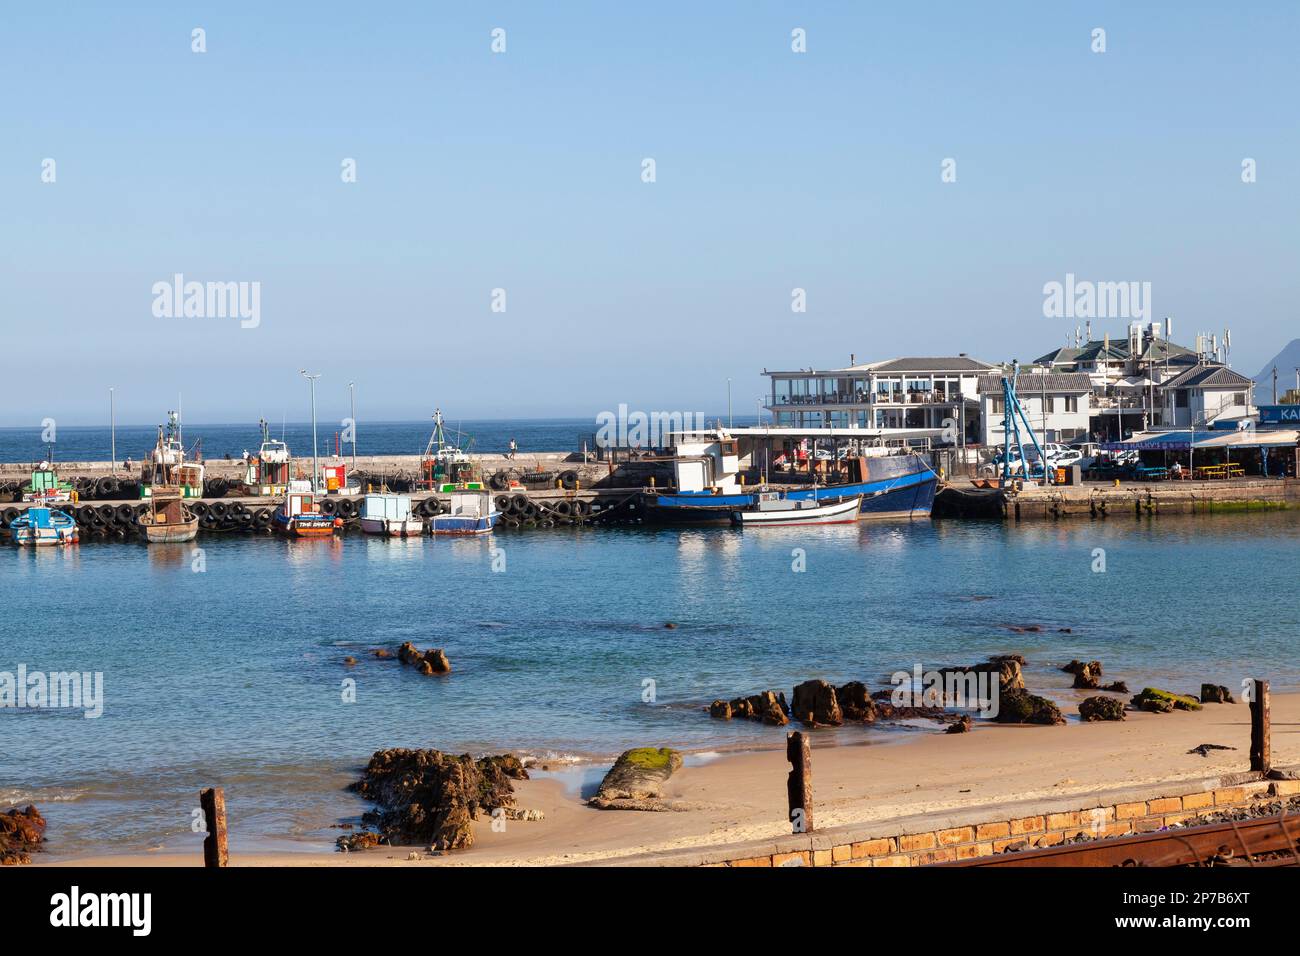 Fishing boats moored in Kalk Bay Harbour, Cape Town, Western Cape, South Africa at sunset, overlooked by a popular restaurant Stock Photo